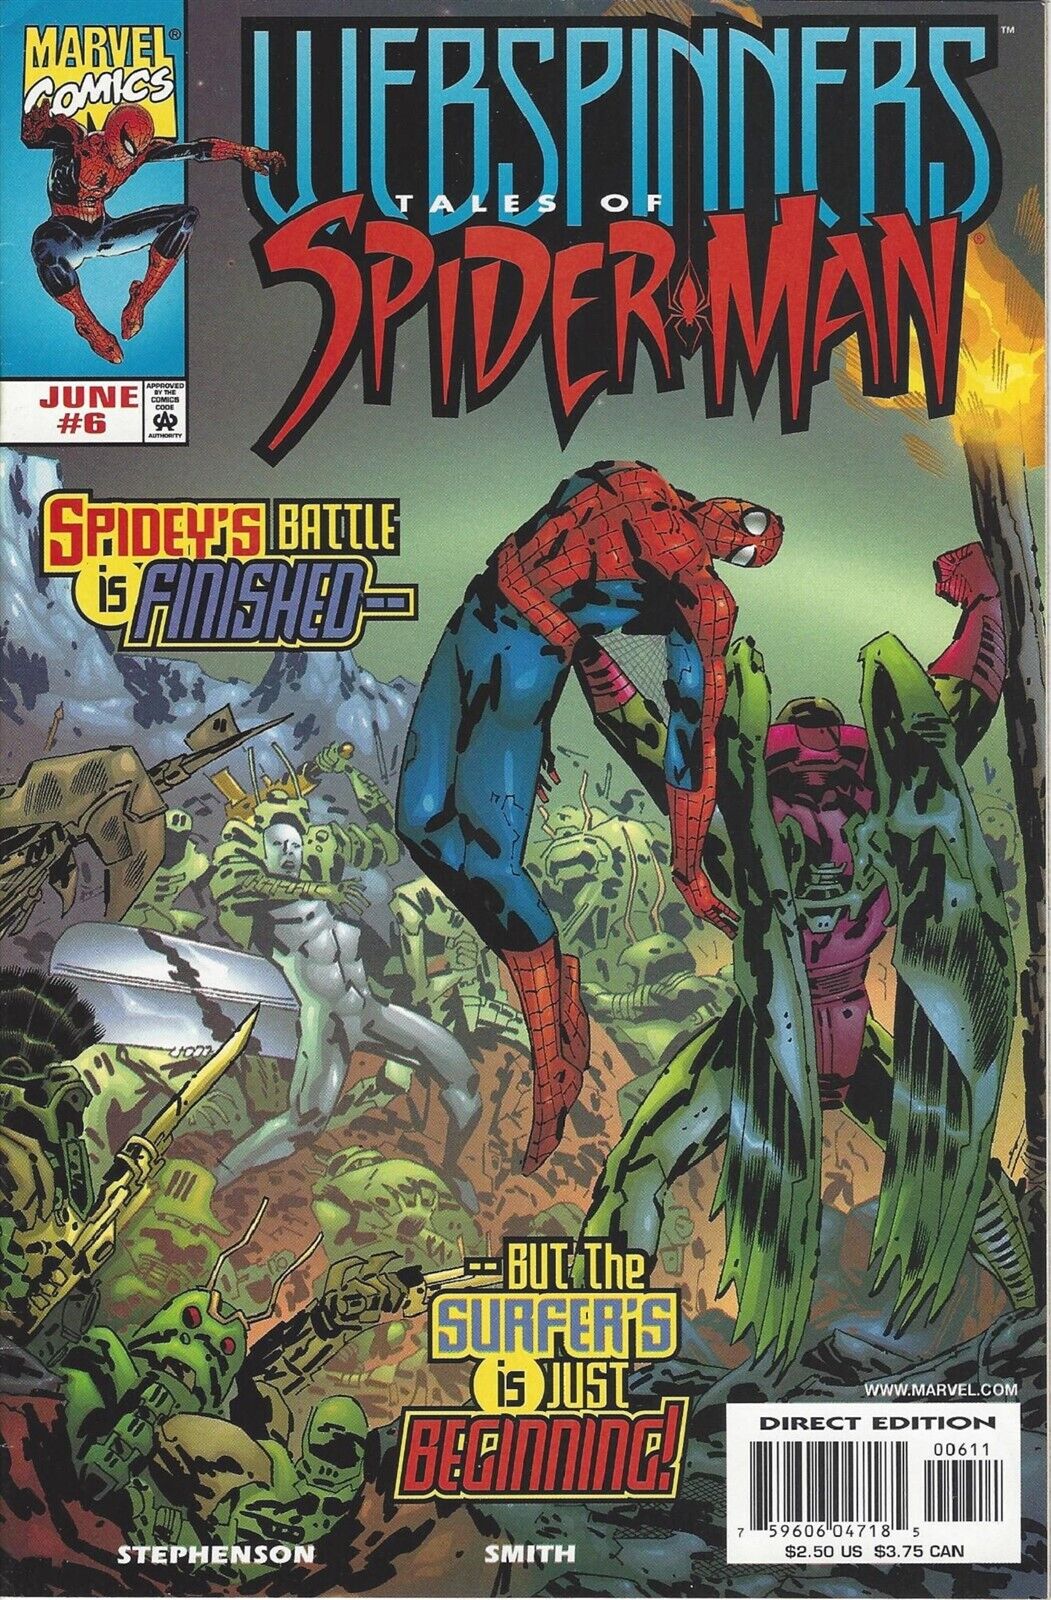 Webspinners: Tales of Spider-Man #6 With Everything to Lose